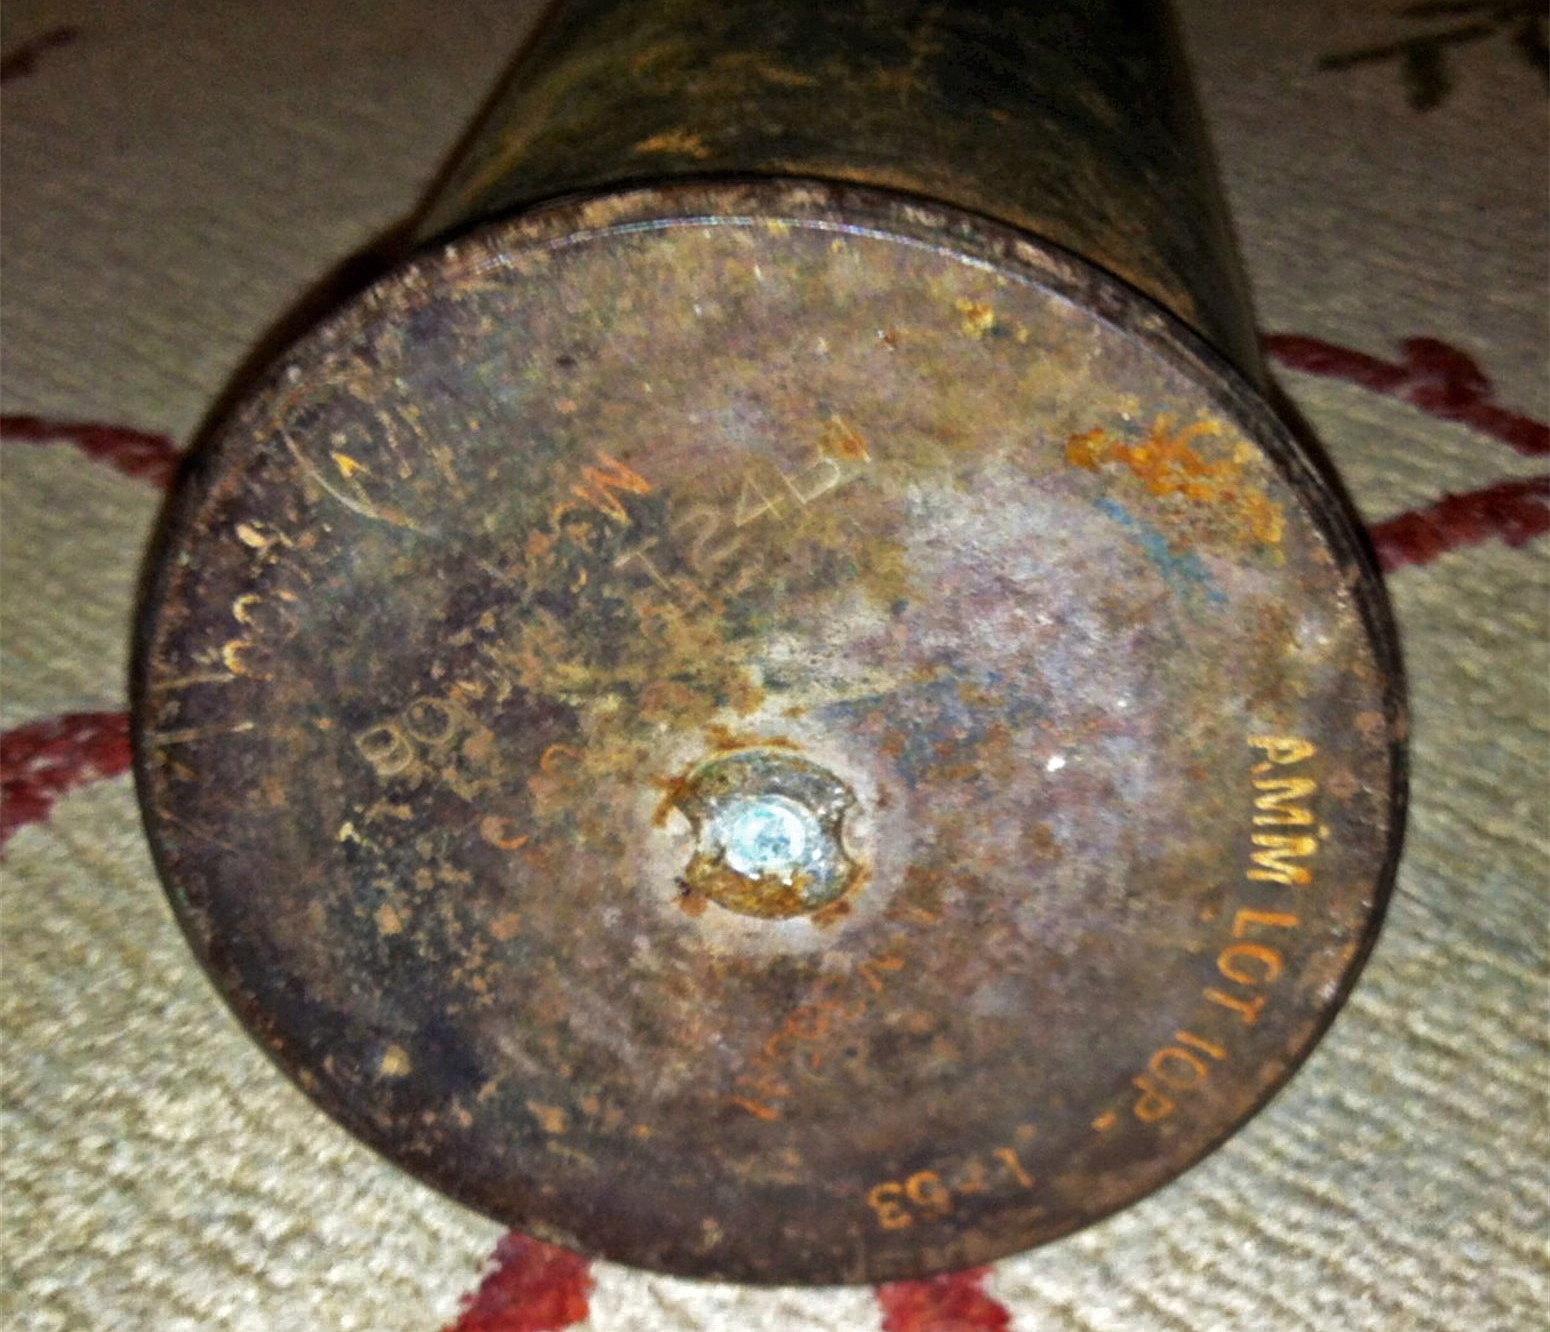 This photo provided by Paul Melton shows a  60-year-old live tank round from the bottom Monday in Pendleton, Ore.